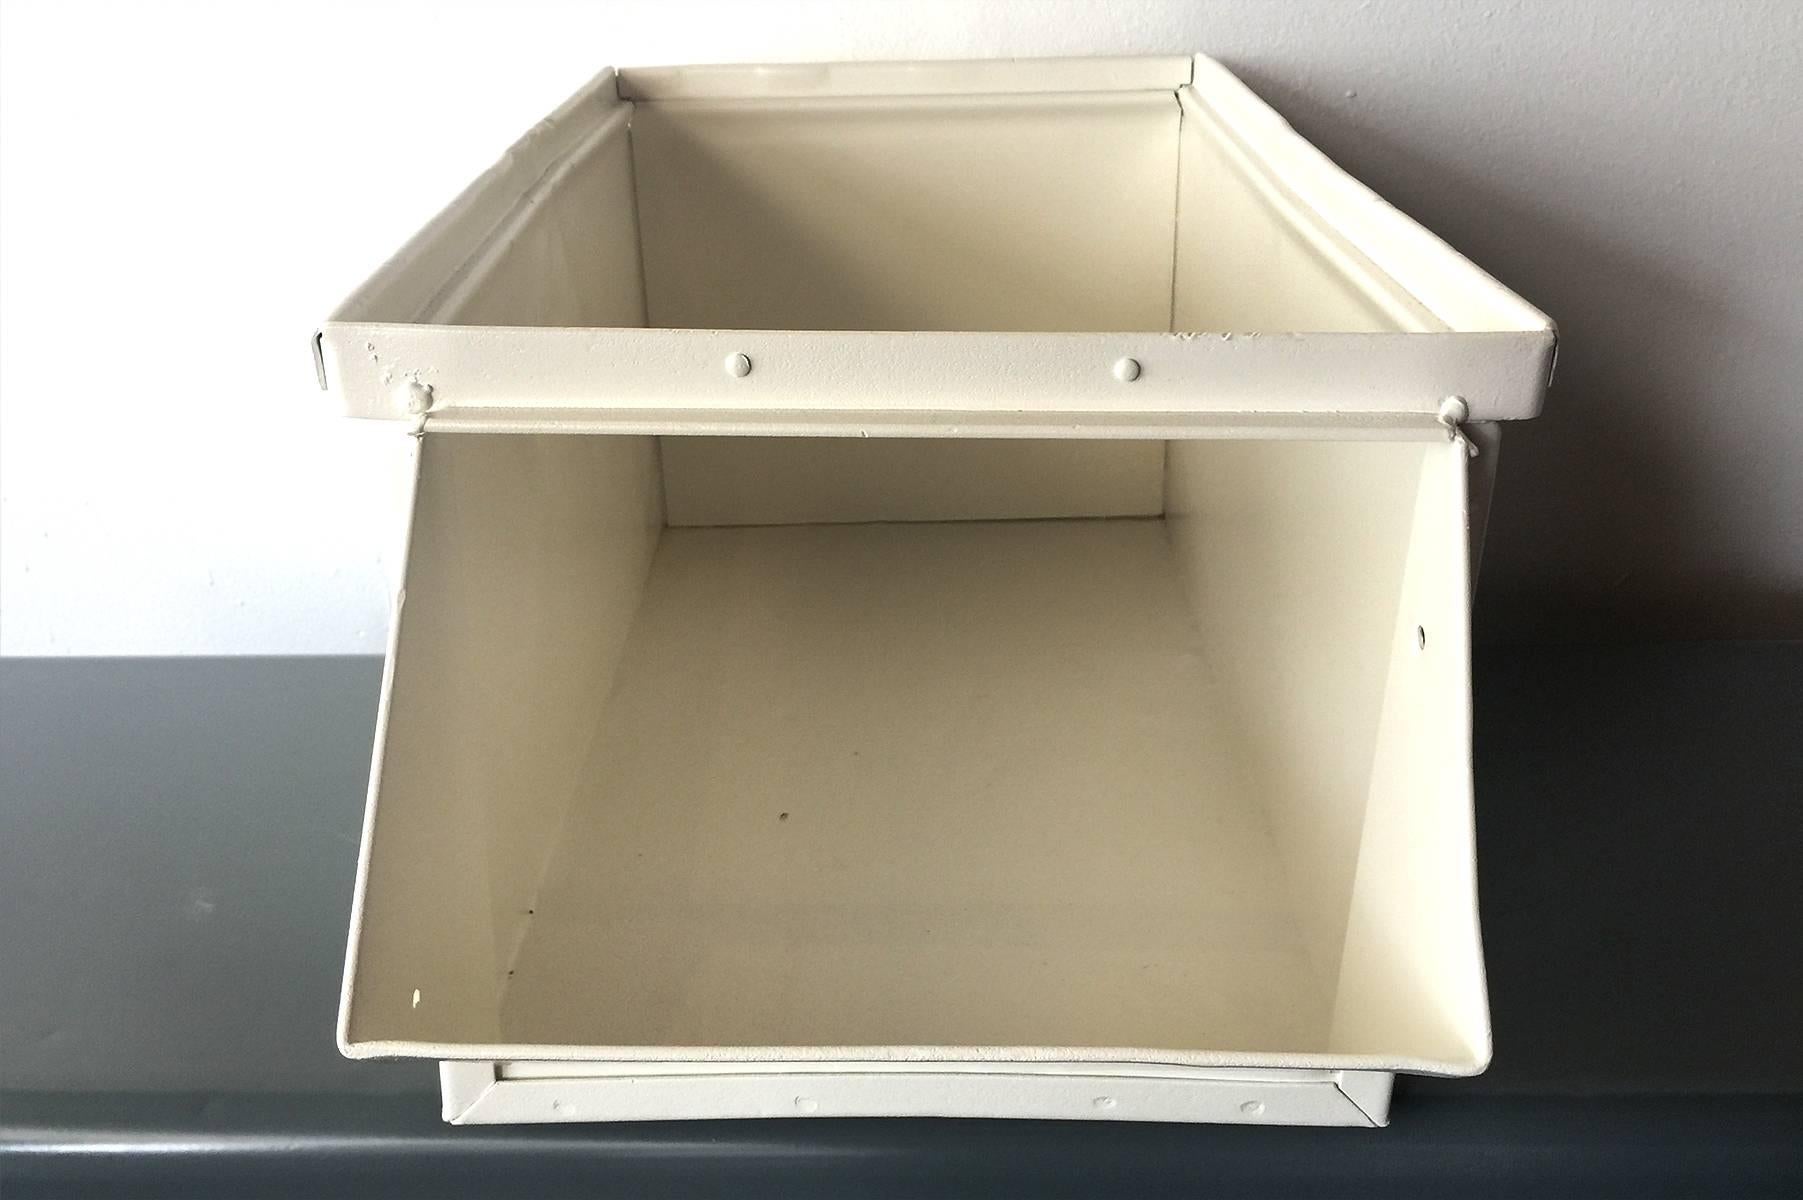 1940s Industrial Storage Bin, Refinished in White In Good Condition For Sale In Alhambra, CA